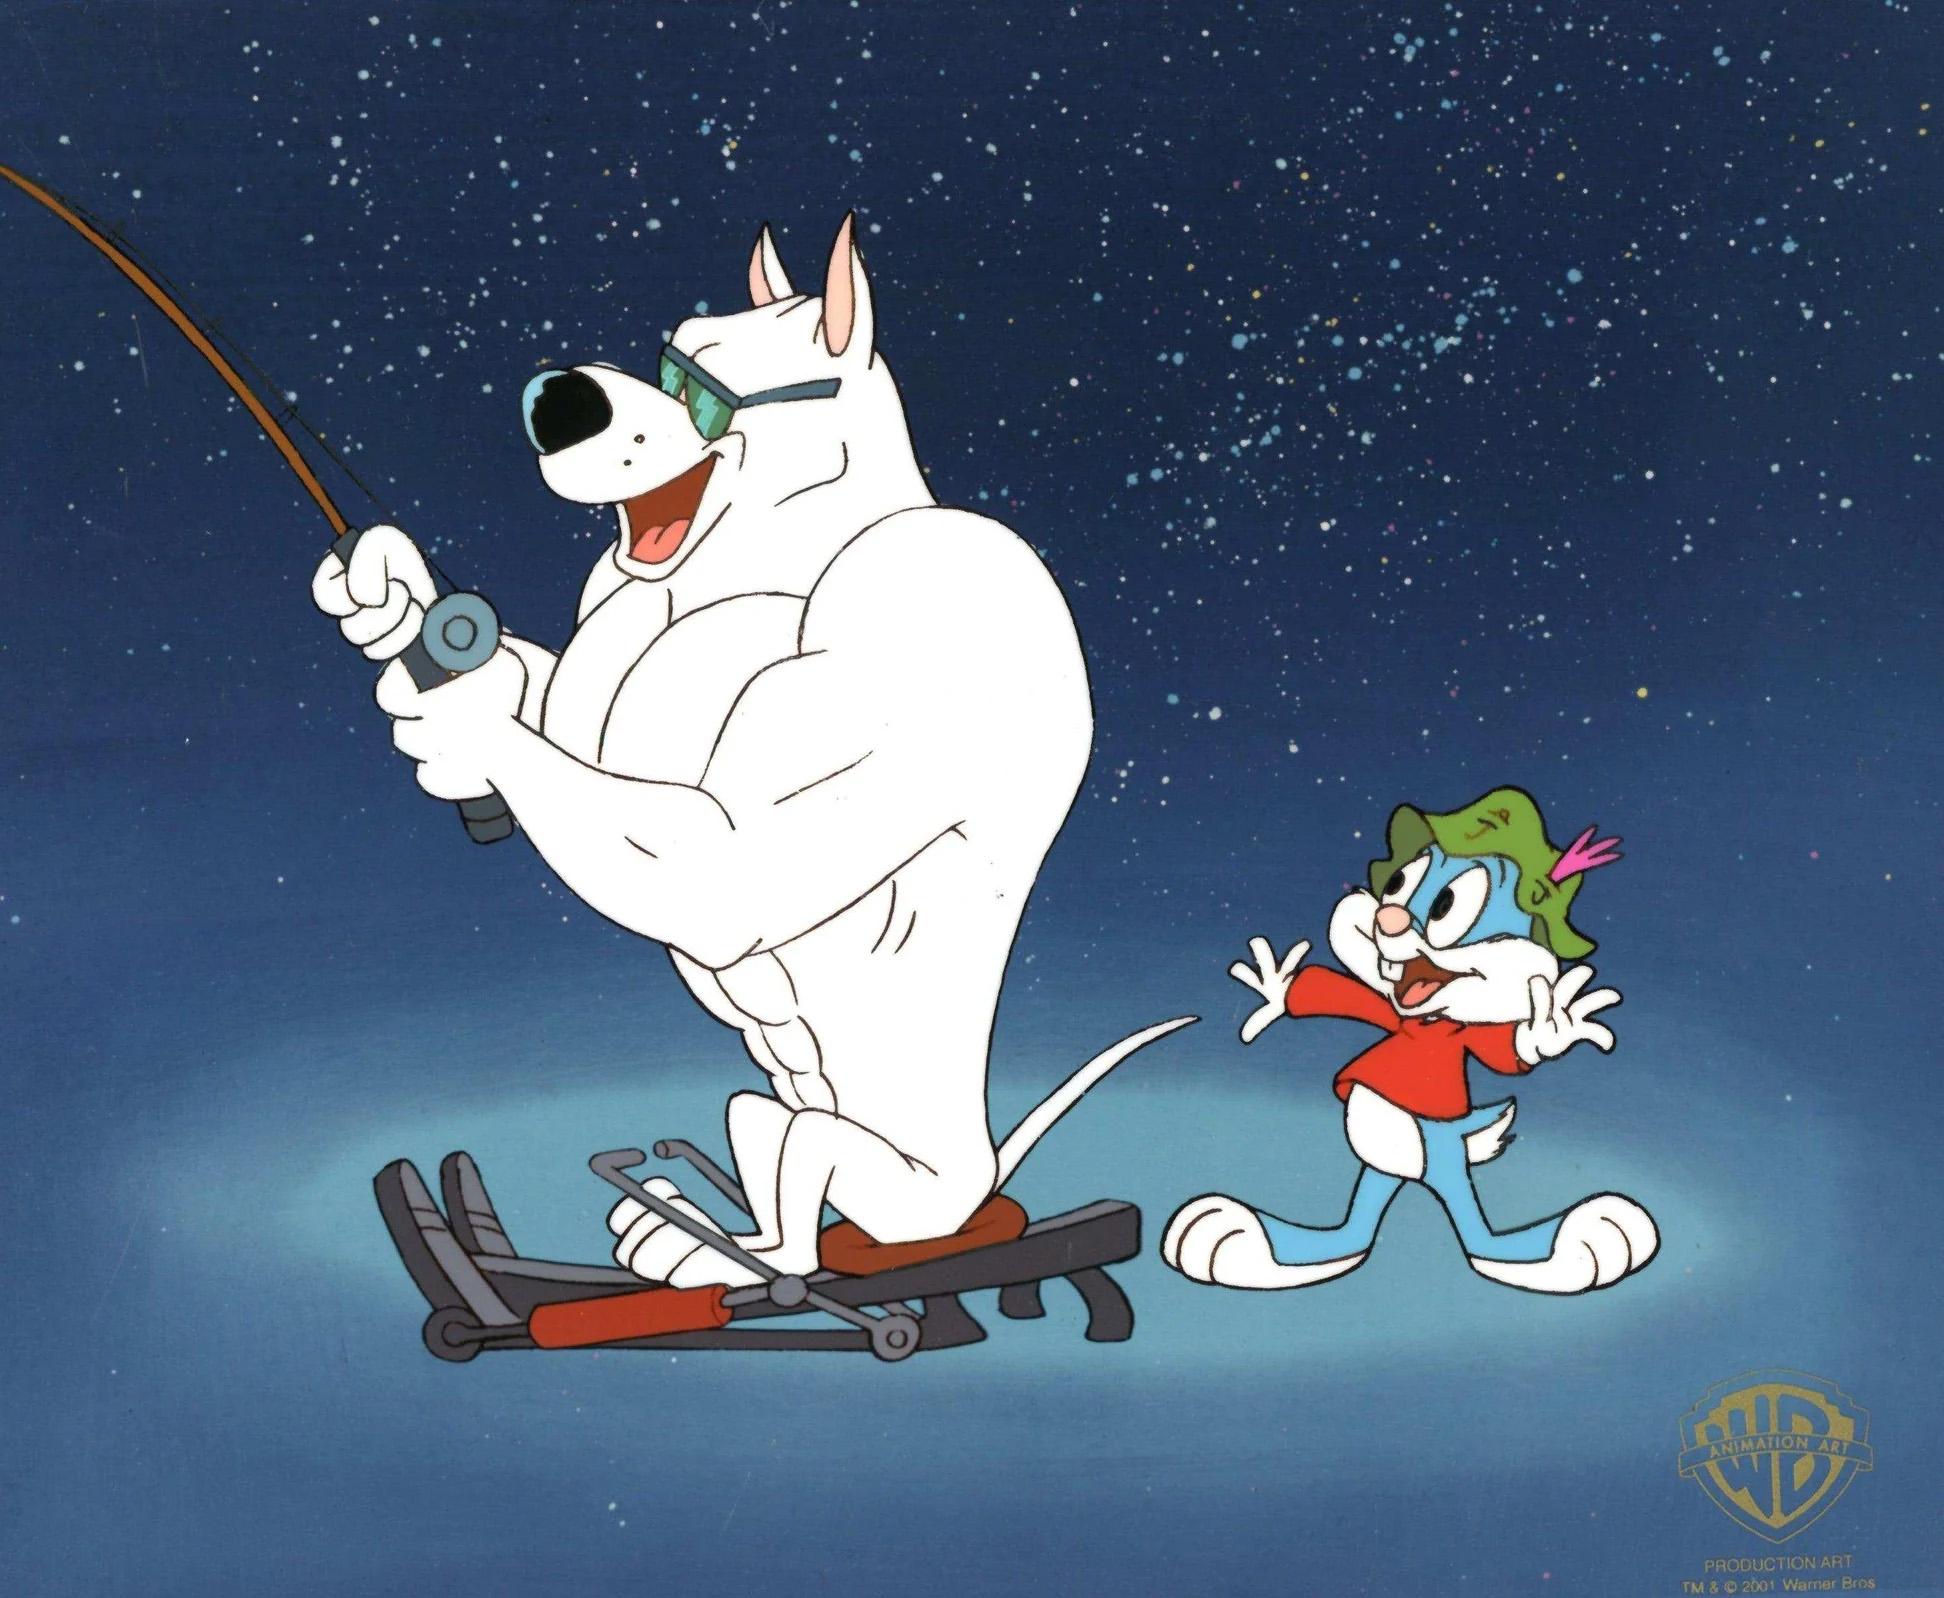 Tiny Toons Original Production Cel: Buster Bunny and Arnold the Pitbull - Art by Warner Bros. Studio Artists